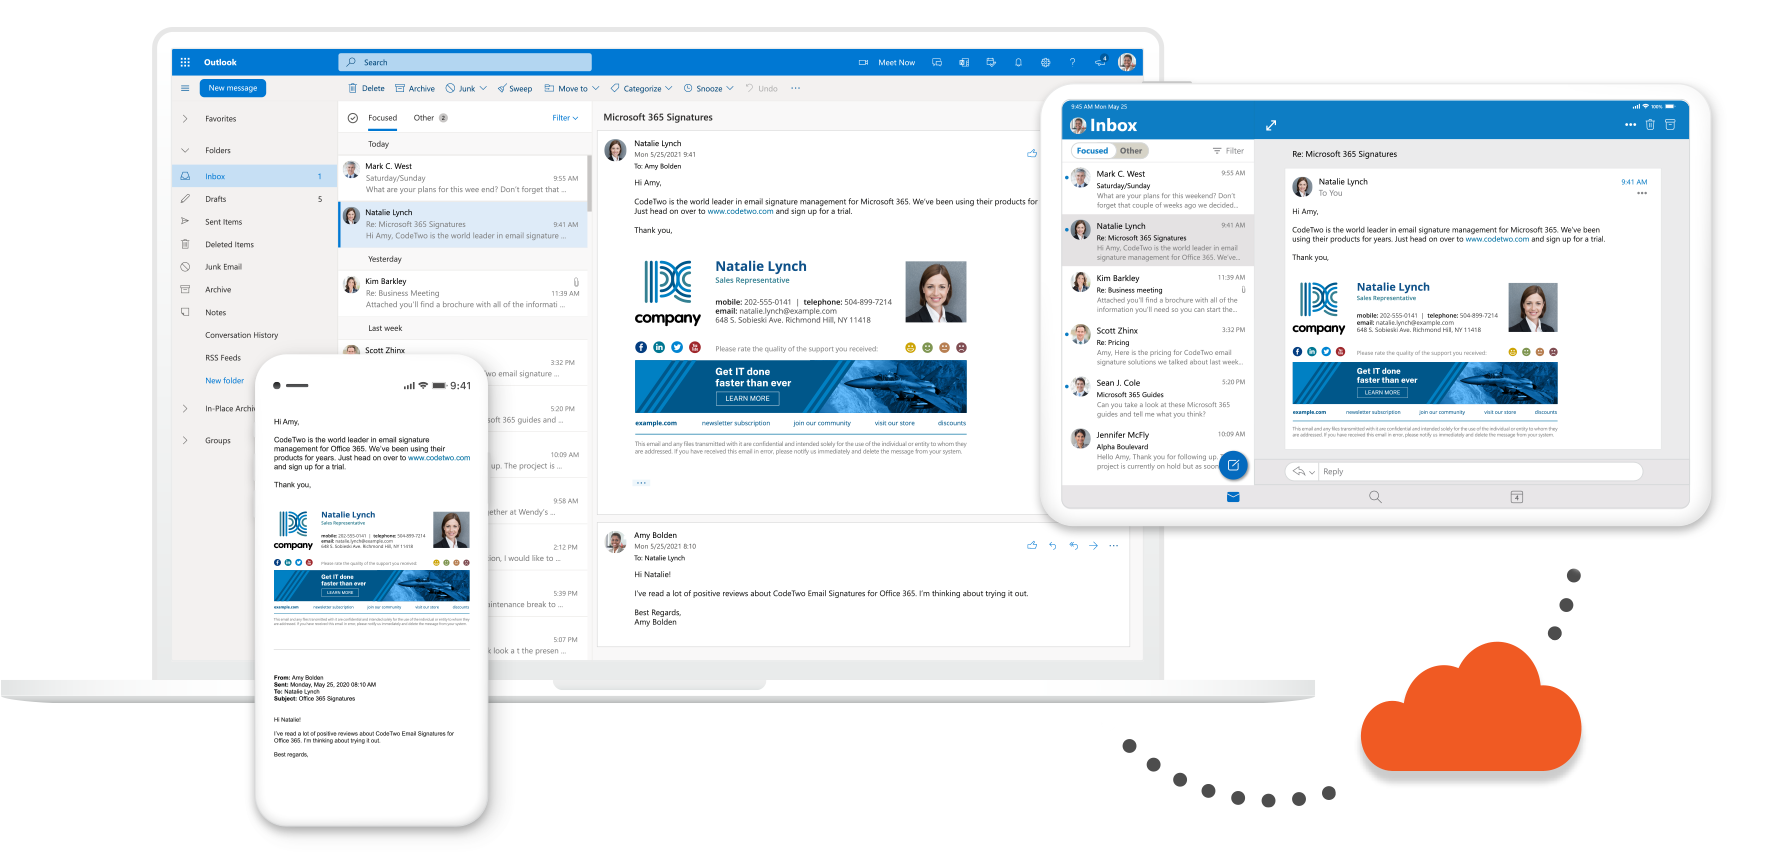 Company-wide email signatures in Microsoft 365/Office 365